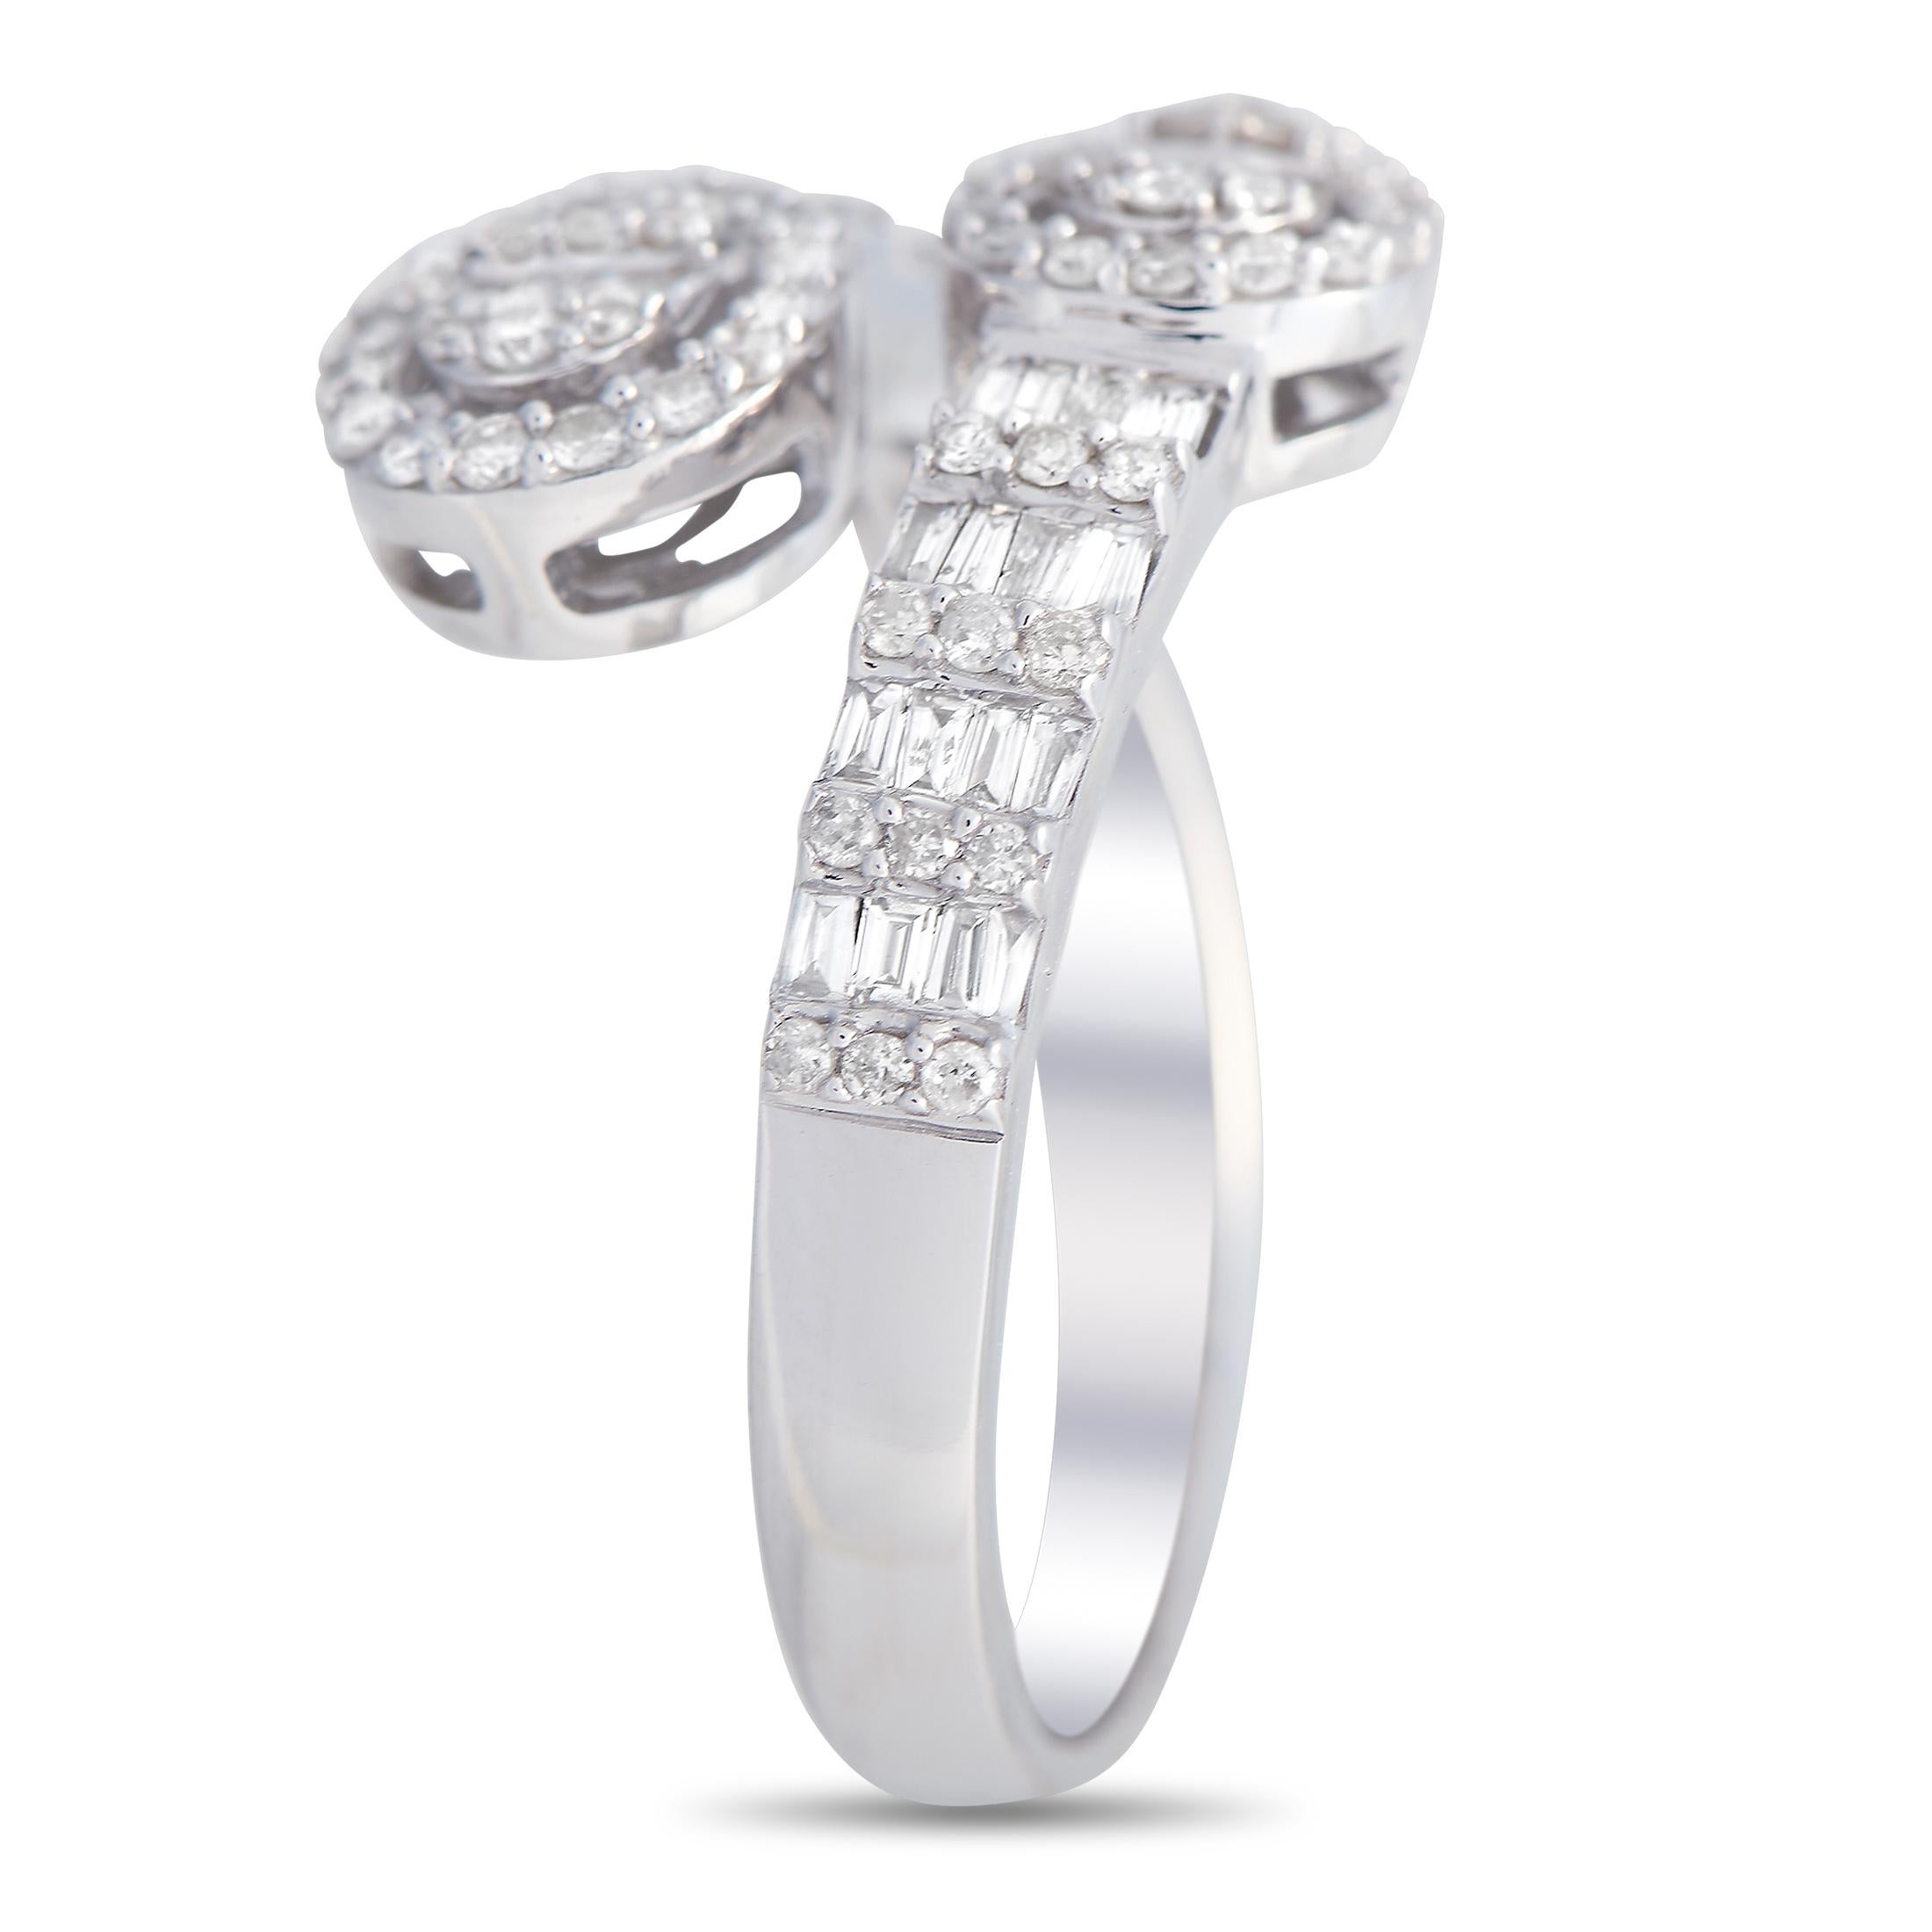 Let the sparkle and graceful curve of this ring polish your looks with feminine flair. The band features an open-bypass style, with shoulders decorated with alternating trios of baguette and round diamonds. One end of the shank has a pear-shaped